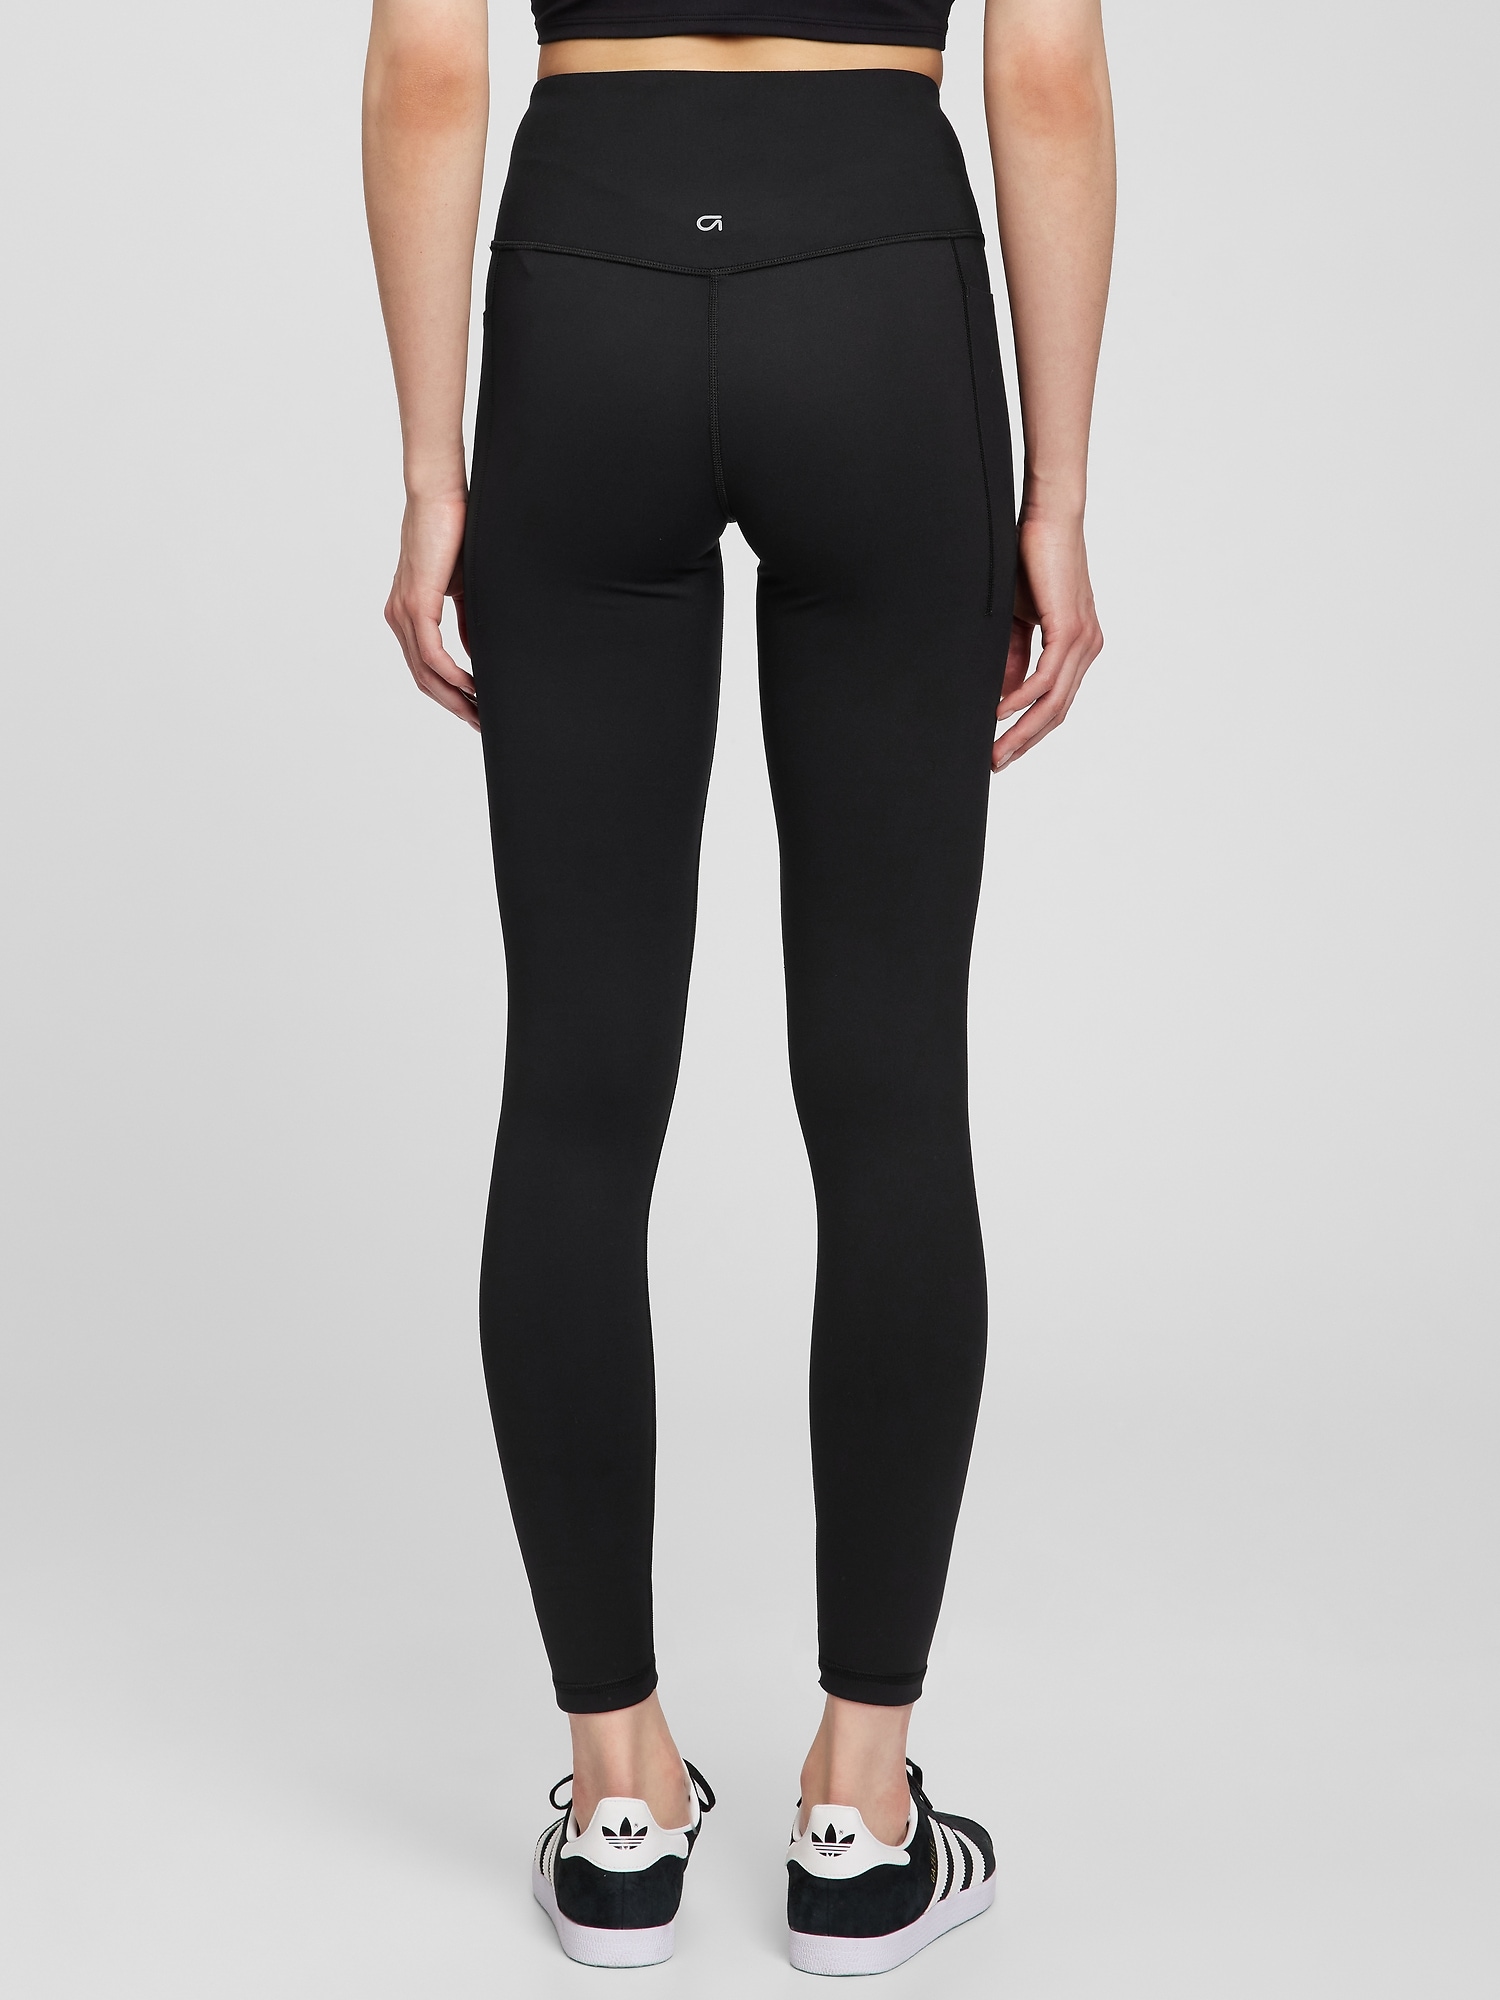 High Waist Elastic Push Up Low Waist Leggings With Four Pockets For Women  Perfect For Workout, Fitness, And Casual Wear H1221 From Mengyang10, $9.21